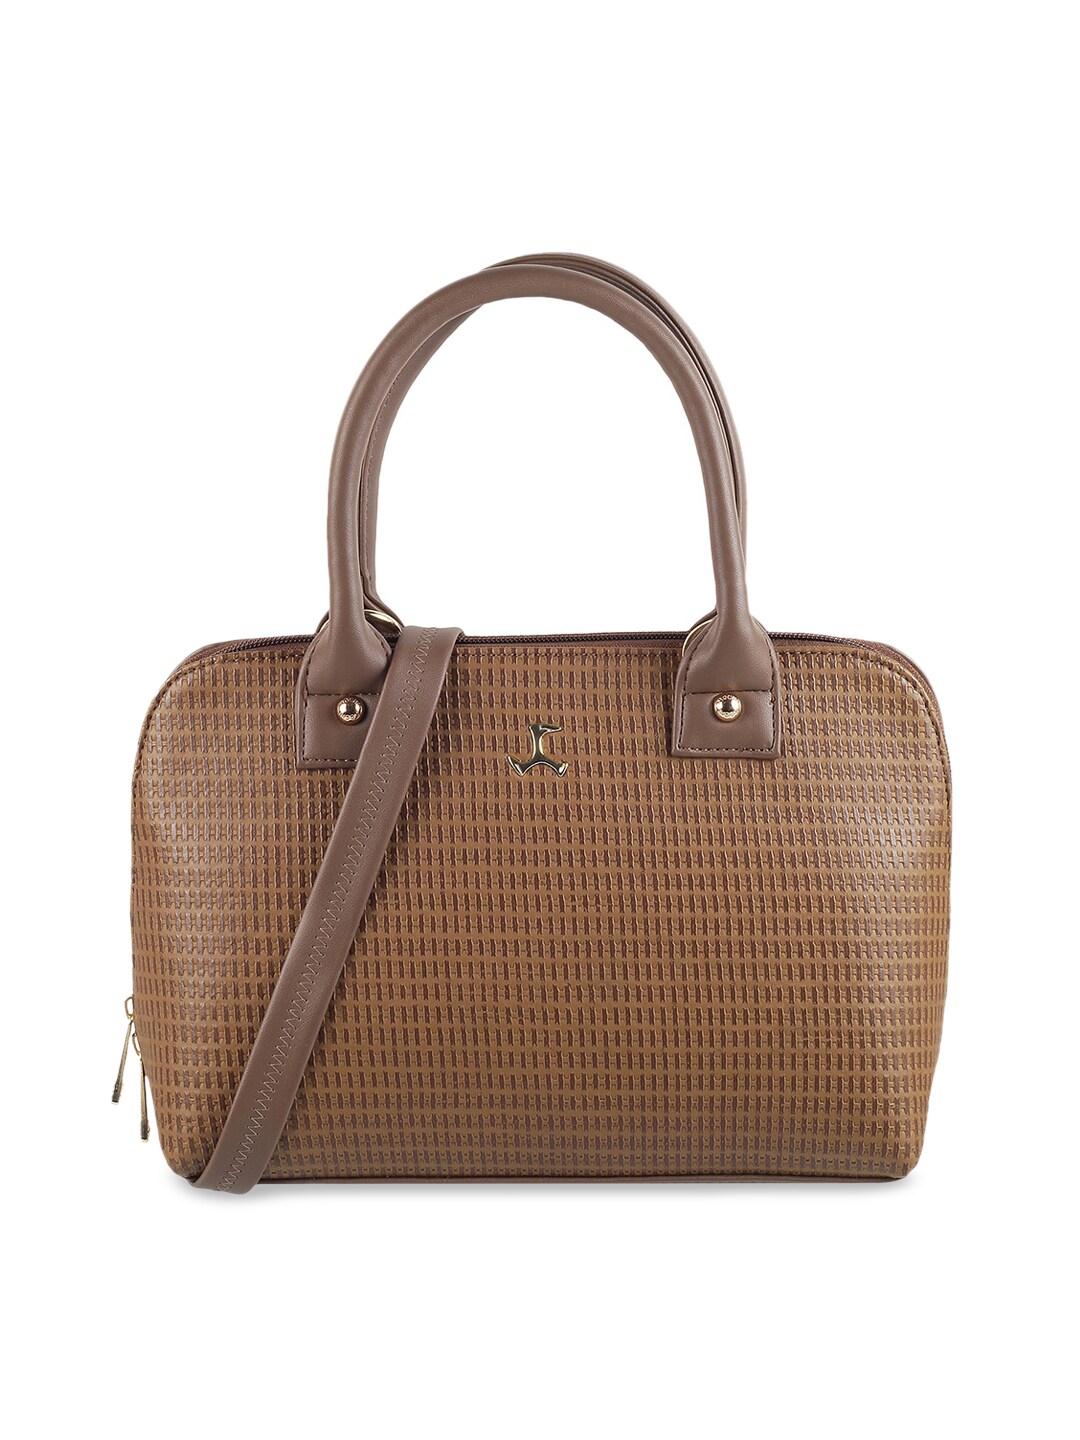 Mochi Brown Textured PU Structured Handheld Bag with Applique Price in India